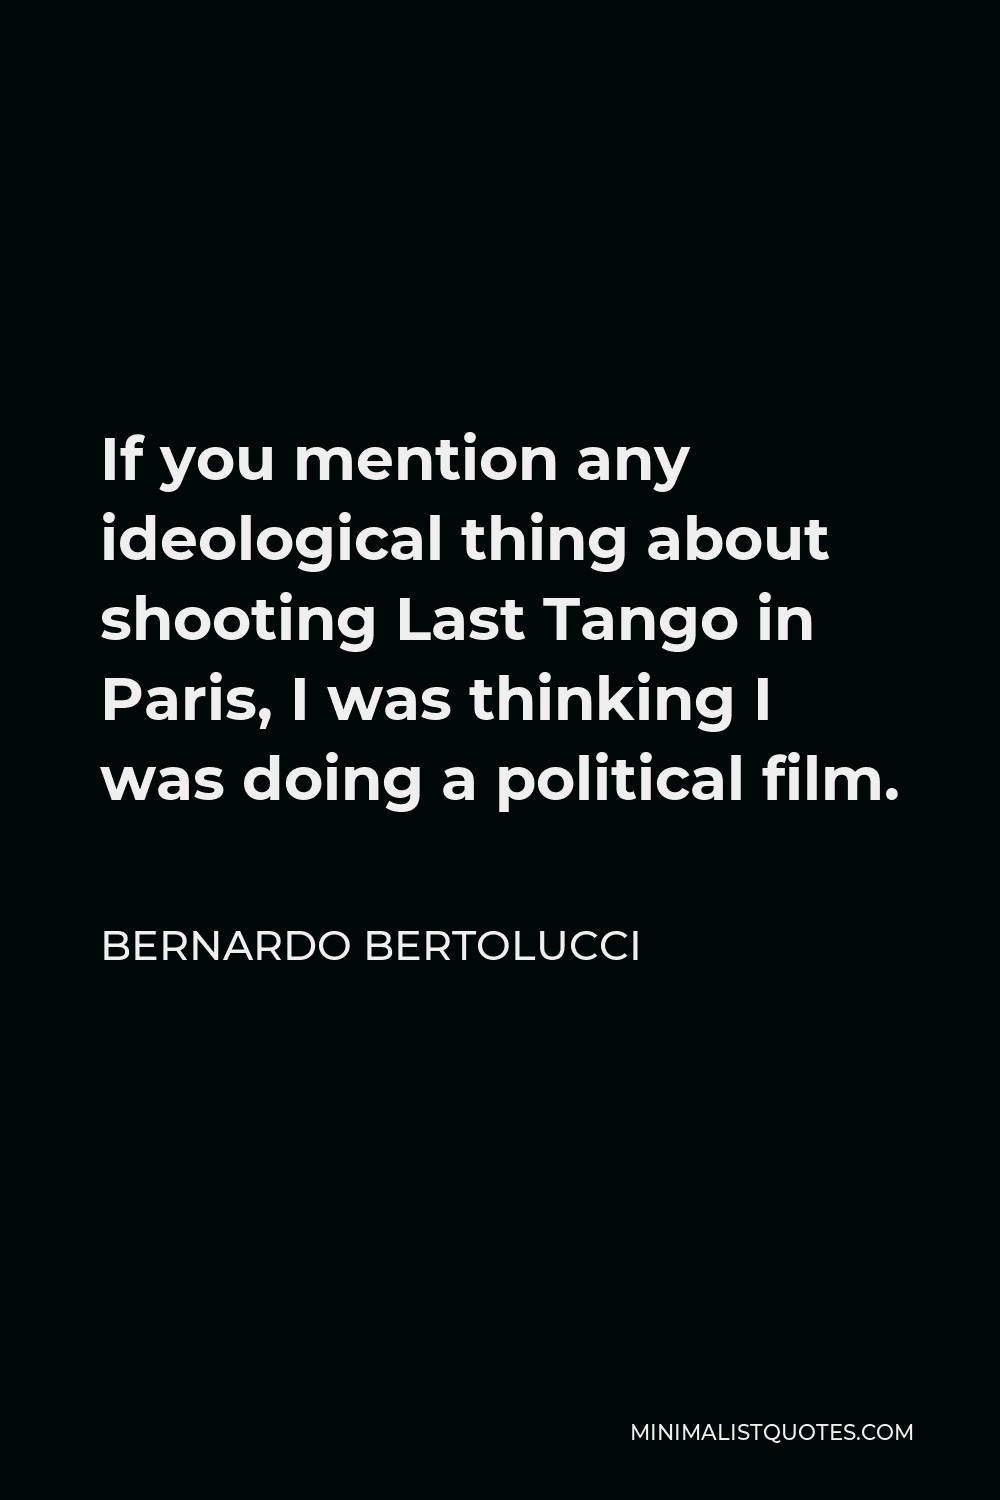 Bernardo Bertolucci Quote - If you mention any ideological thing about shooting Last Tango in Paris, I was thinking I was doing a political film.